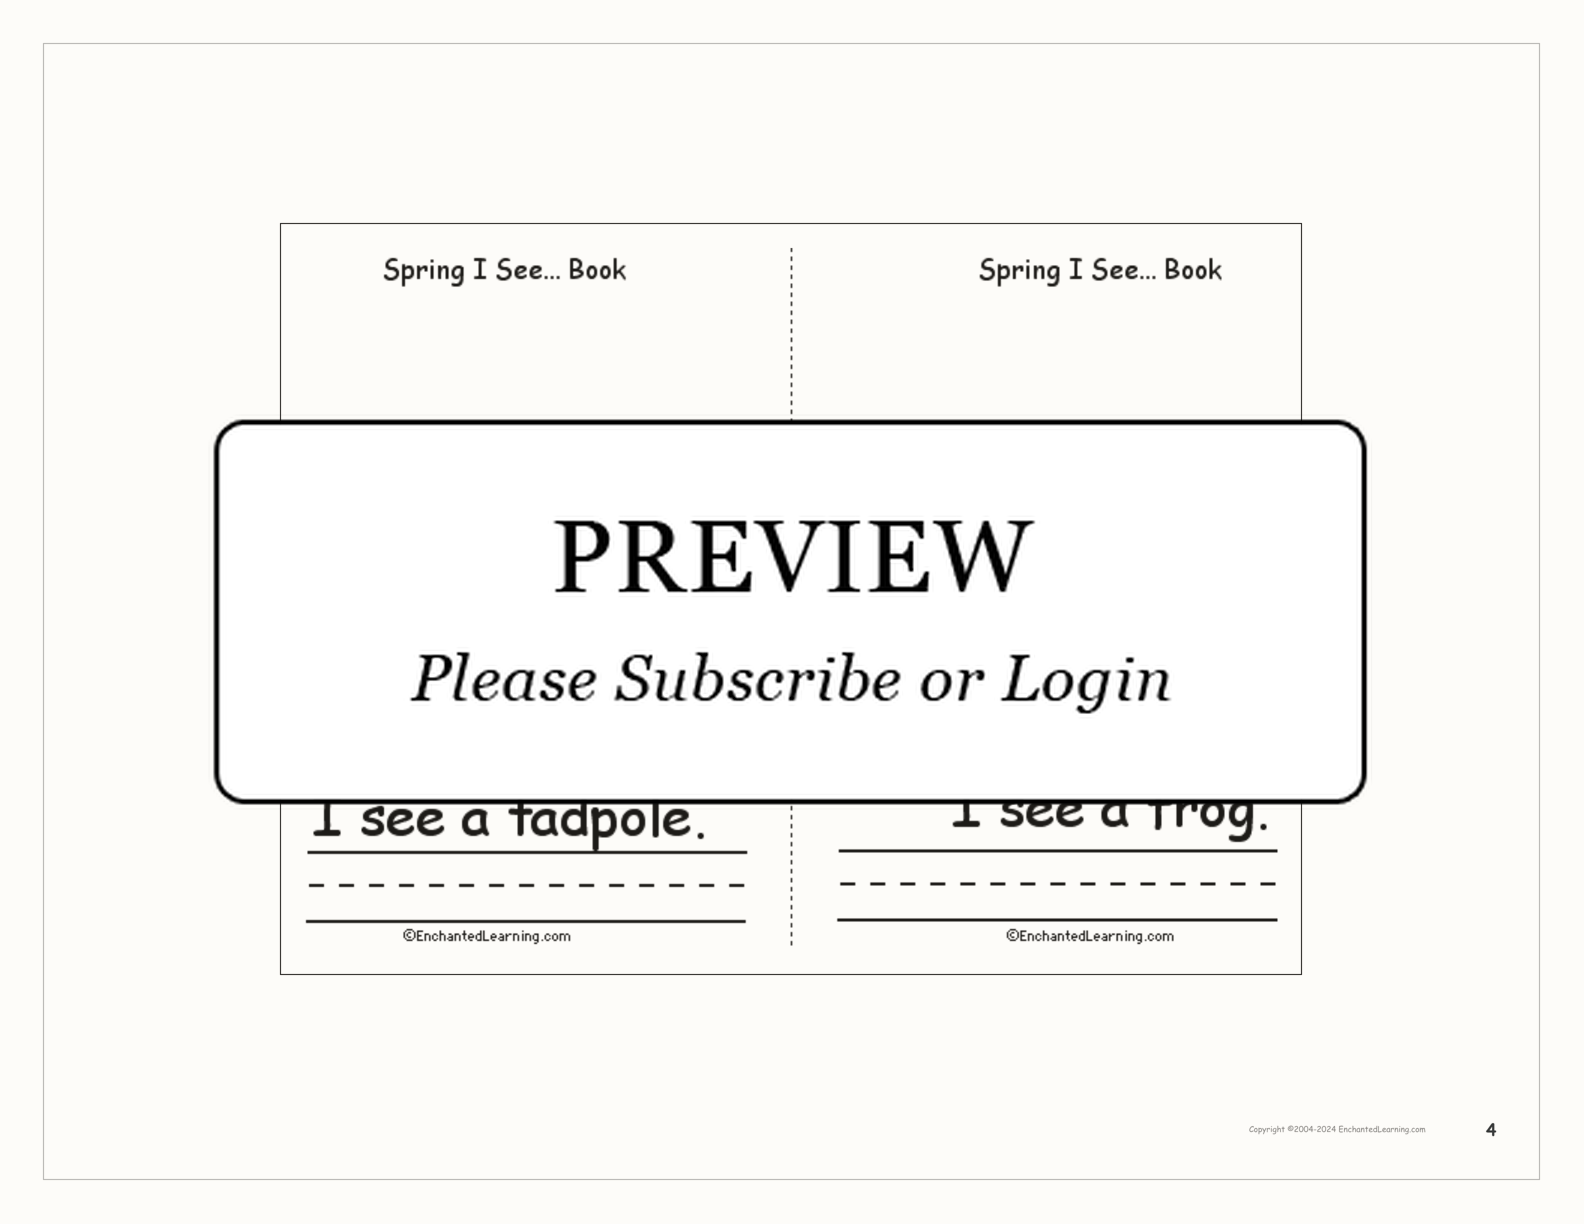 Spring I See... A Printable Book interactive worksheet page 4